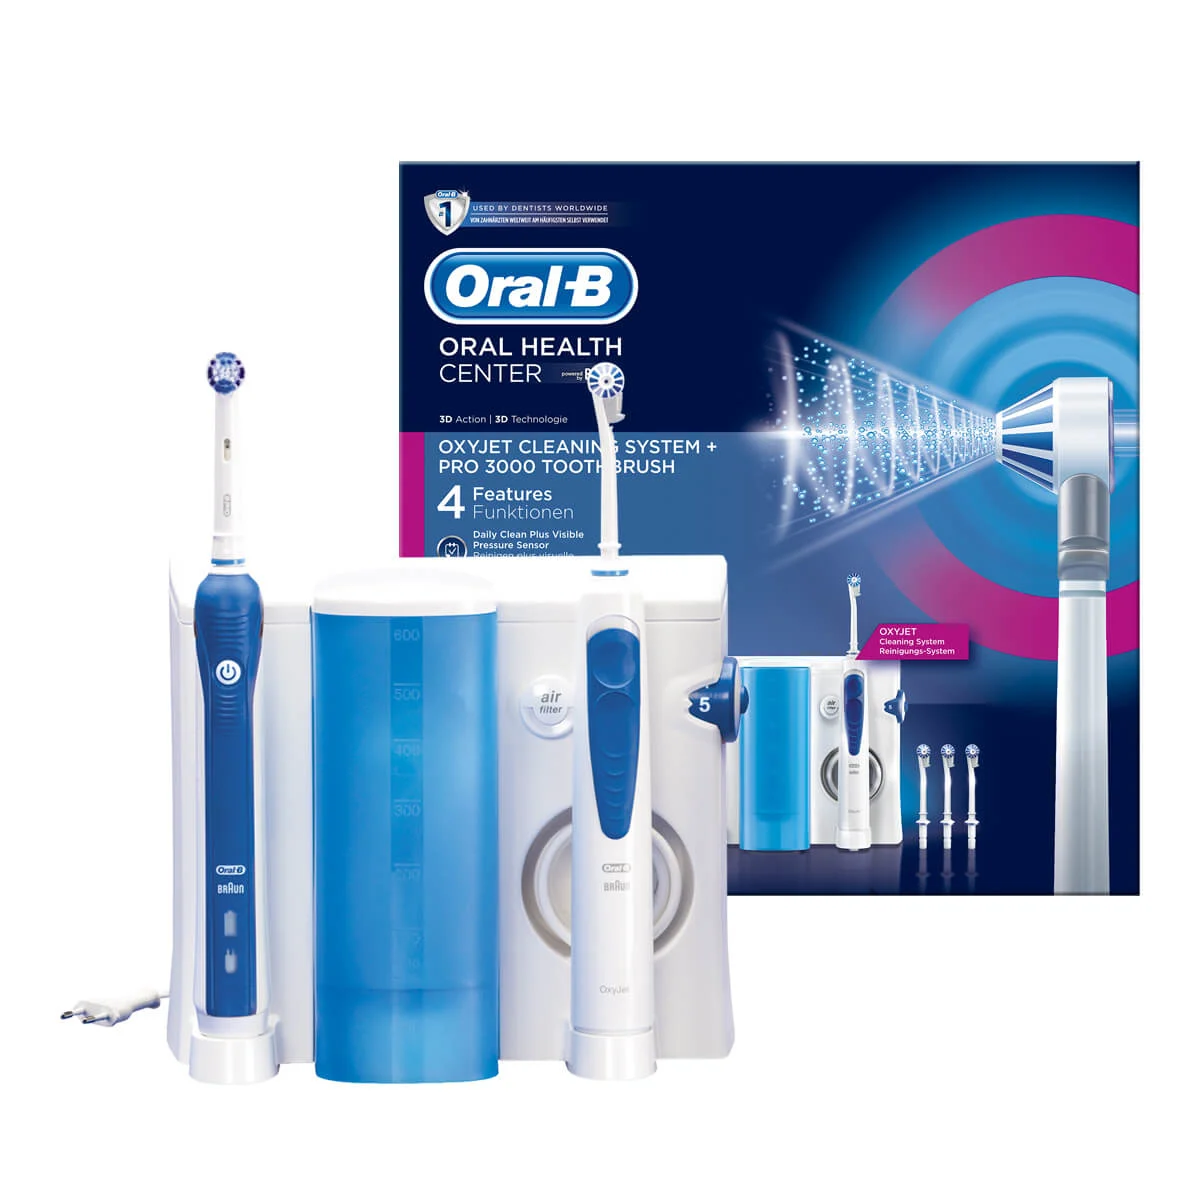 Oral-B Oral Health Center: Oxyjet Cleaning System + PRO 3000 Electric Toothbrush 